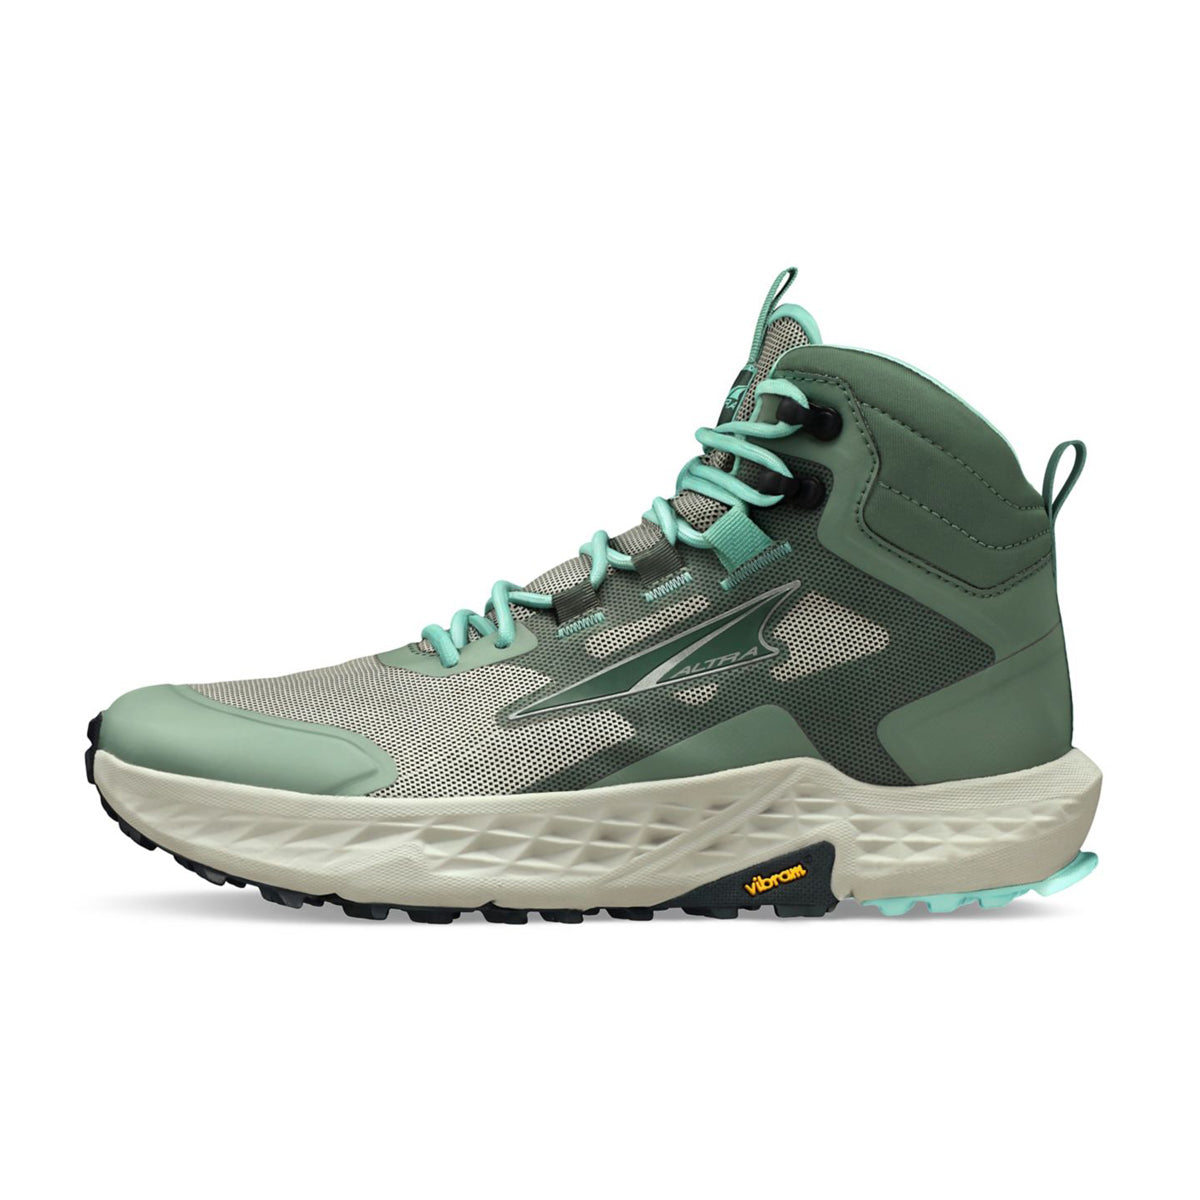 Altra Women's Timp Hiker in  by GOHUNT | Altra - GOHUNT Shop